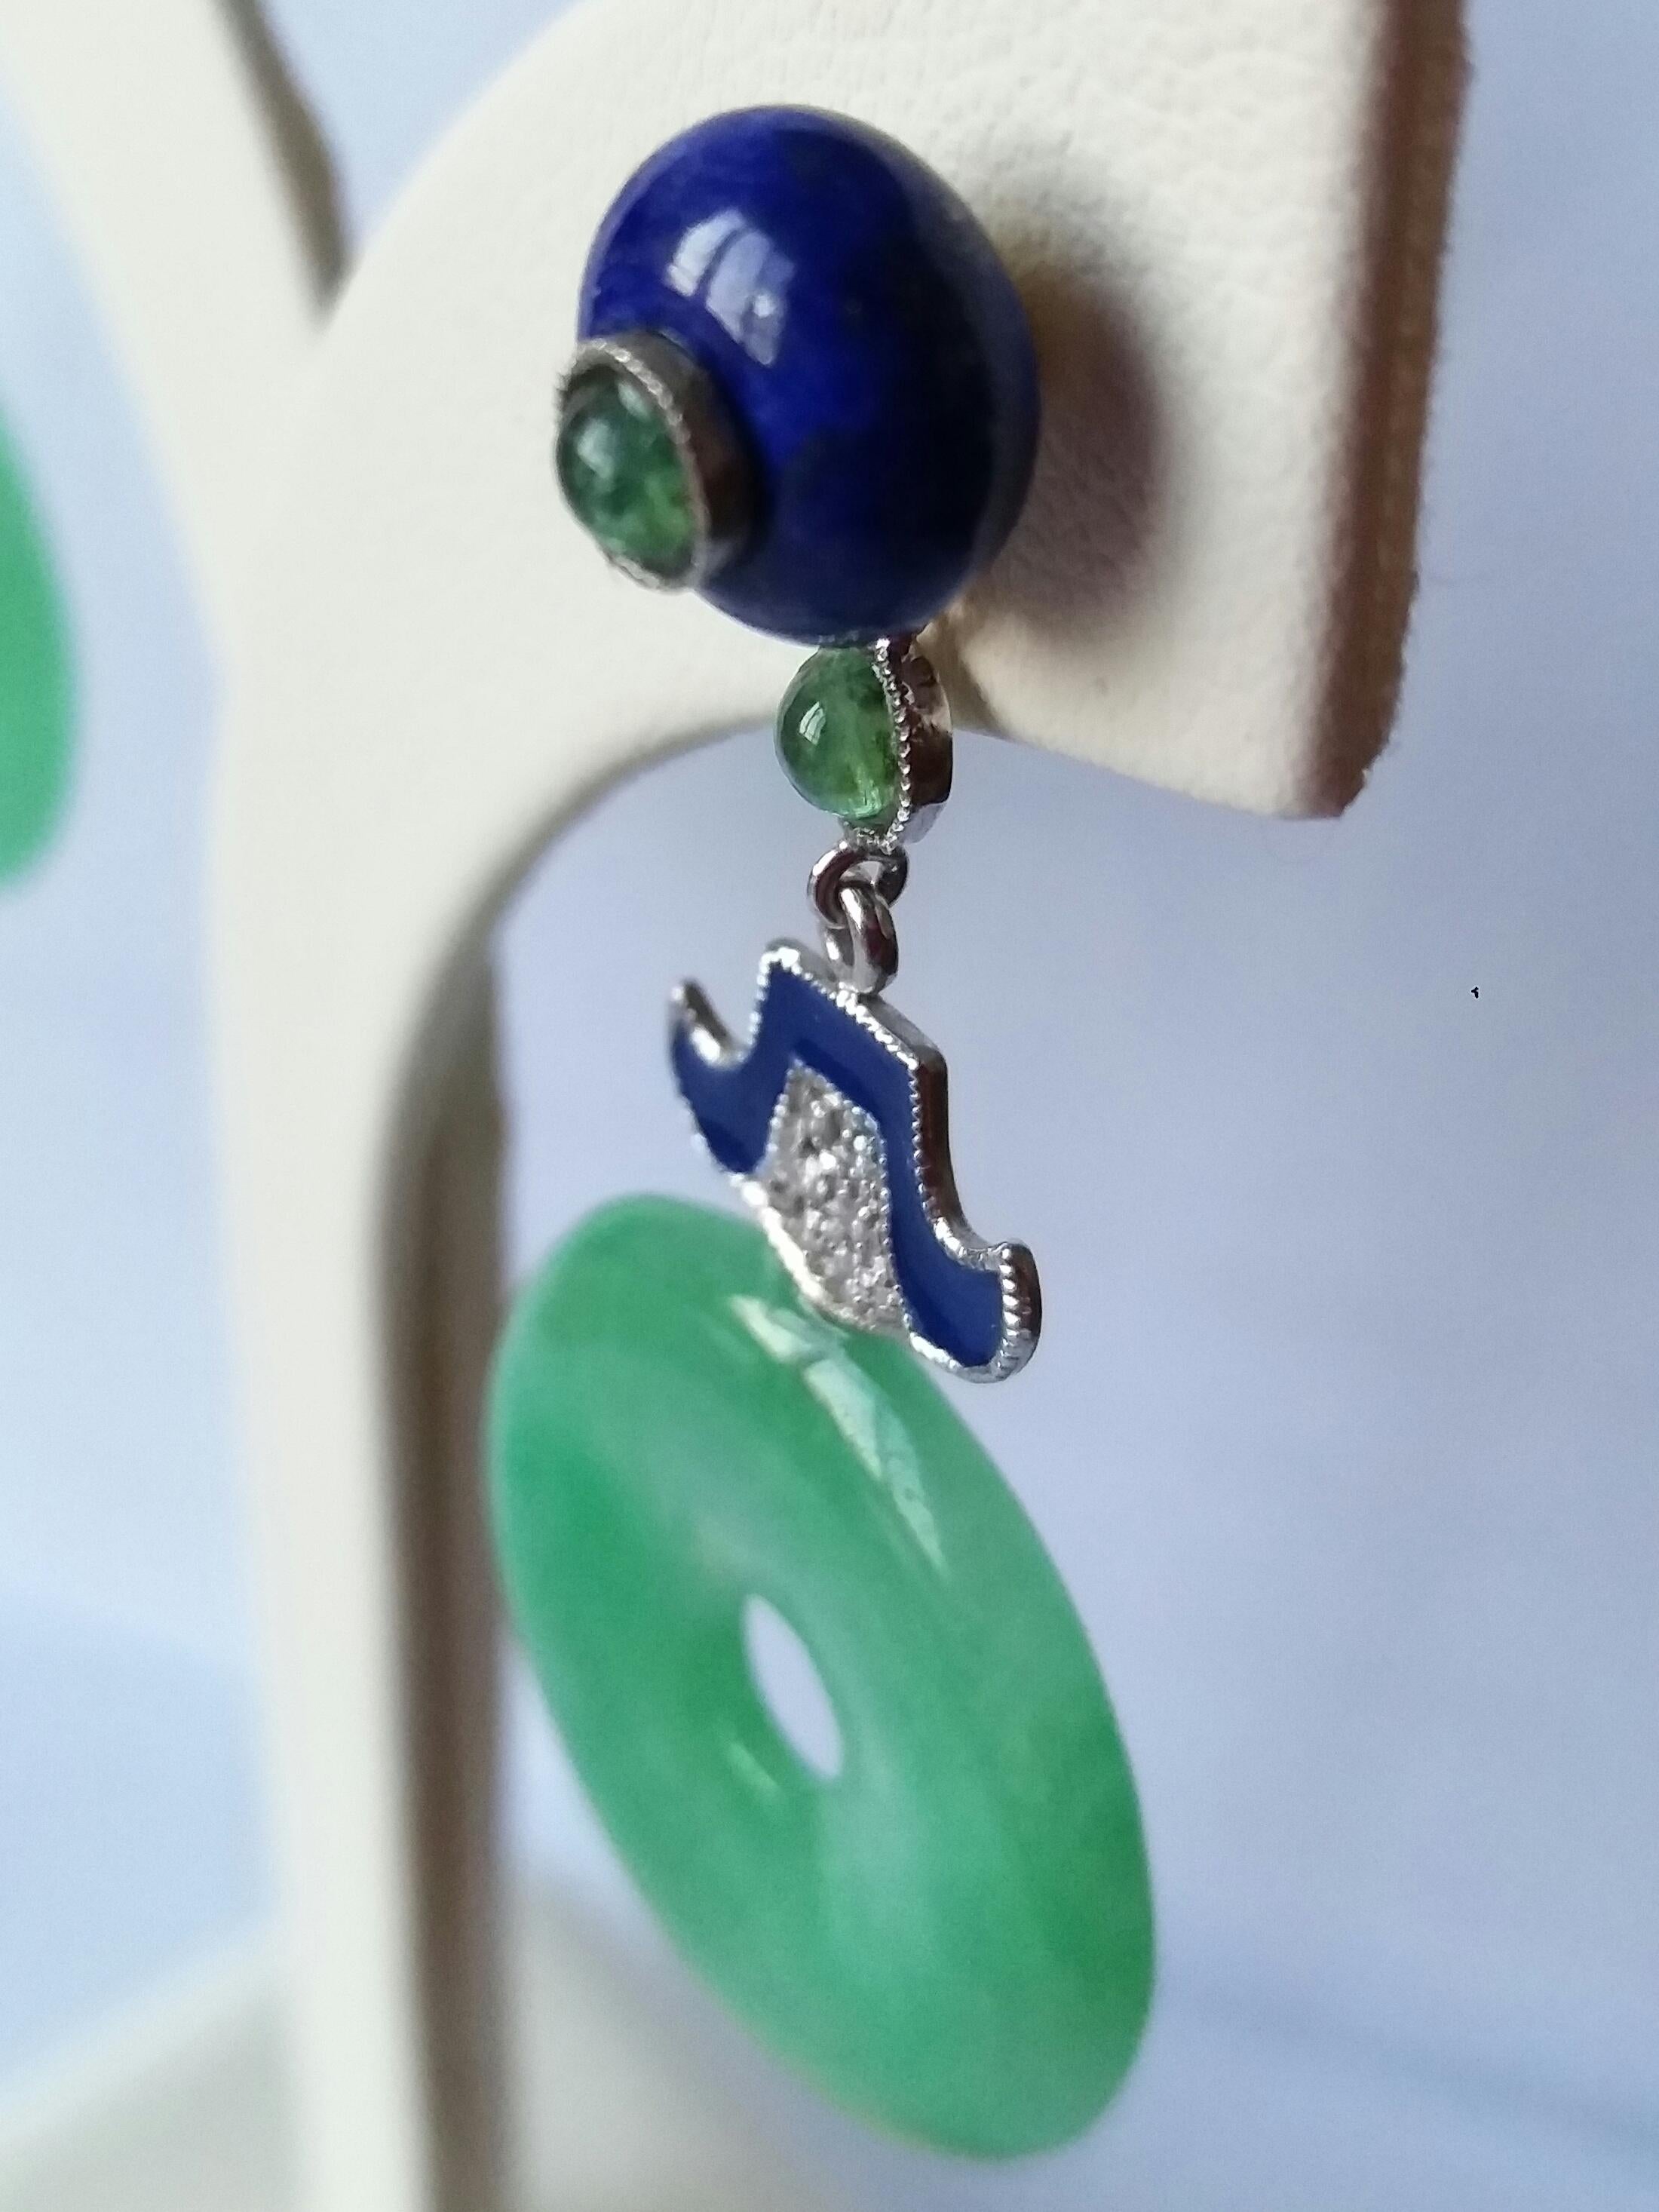 Tops are 2 round Lapis Lazuli buttons with a small round emerald cabochon in the center , middle parts in white gold,small full cut round diamonds , 2 small round emerald cabochon and blue enamel , bottom parts are 2 plain Burma Jade donuts
In 1978